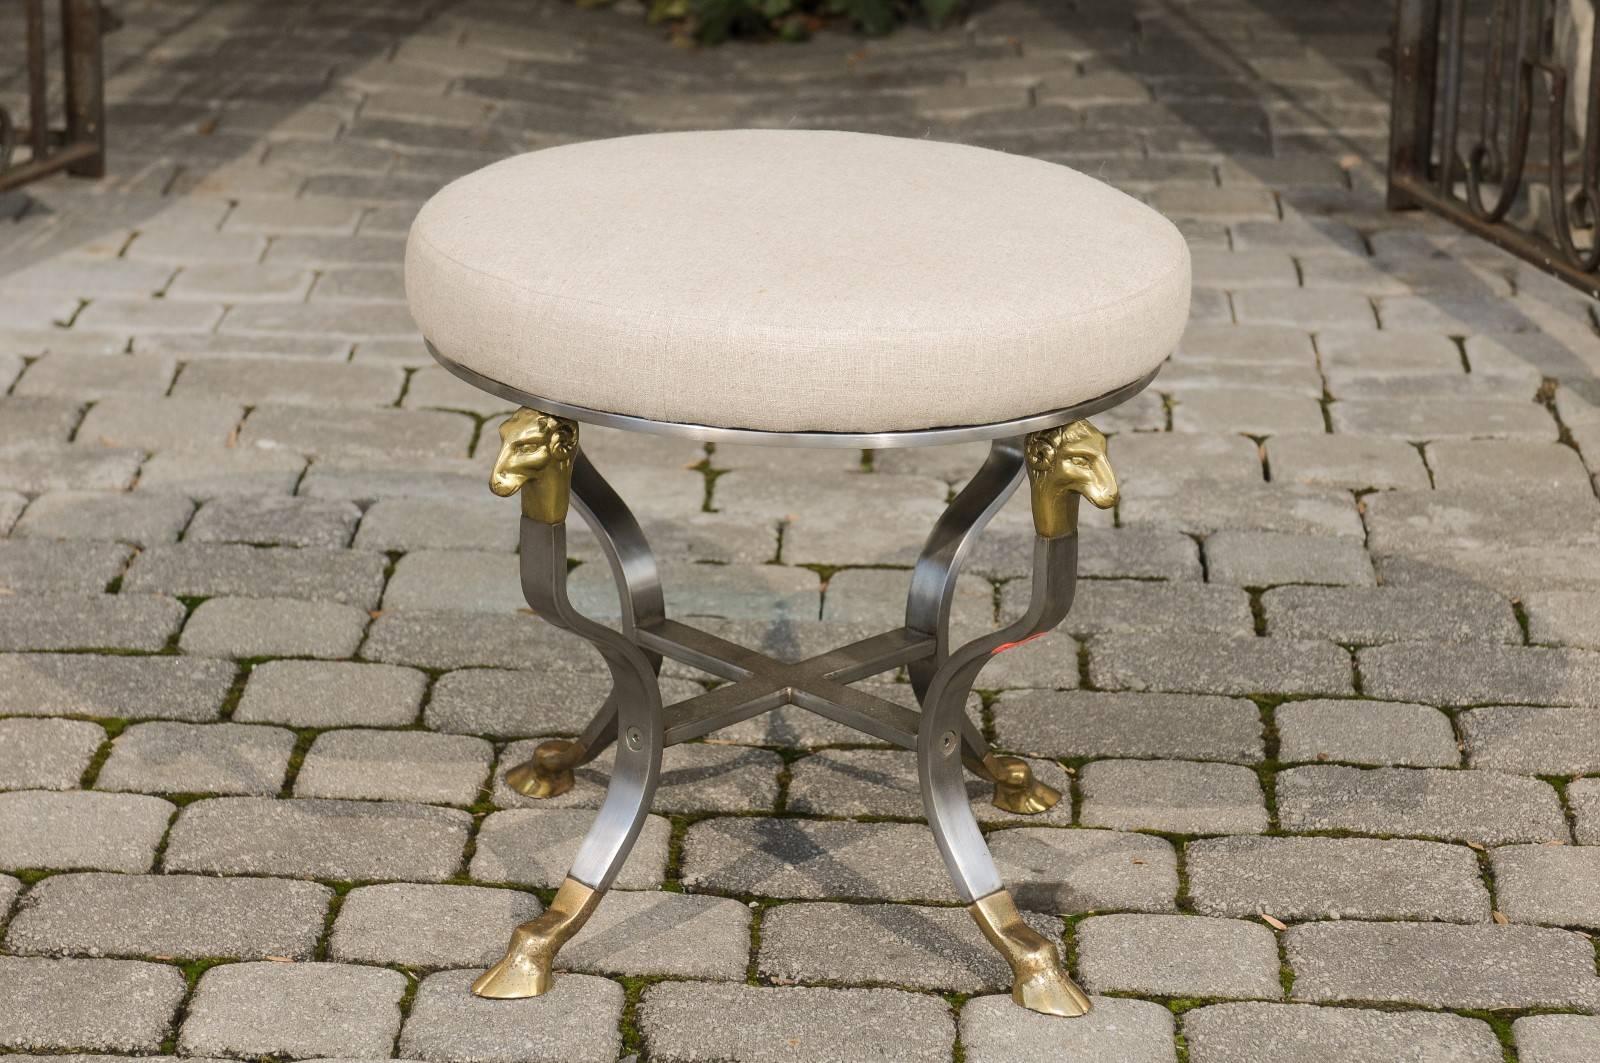 An Italian Directoire style steel and brass upholstered stool with ram's heads and hoofed feet from the mid 20th century. Born in the 1950s, this Italian stool features a round seat that has been recovered with a linen fabric. This simple looking